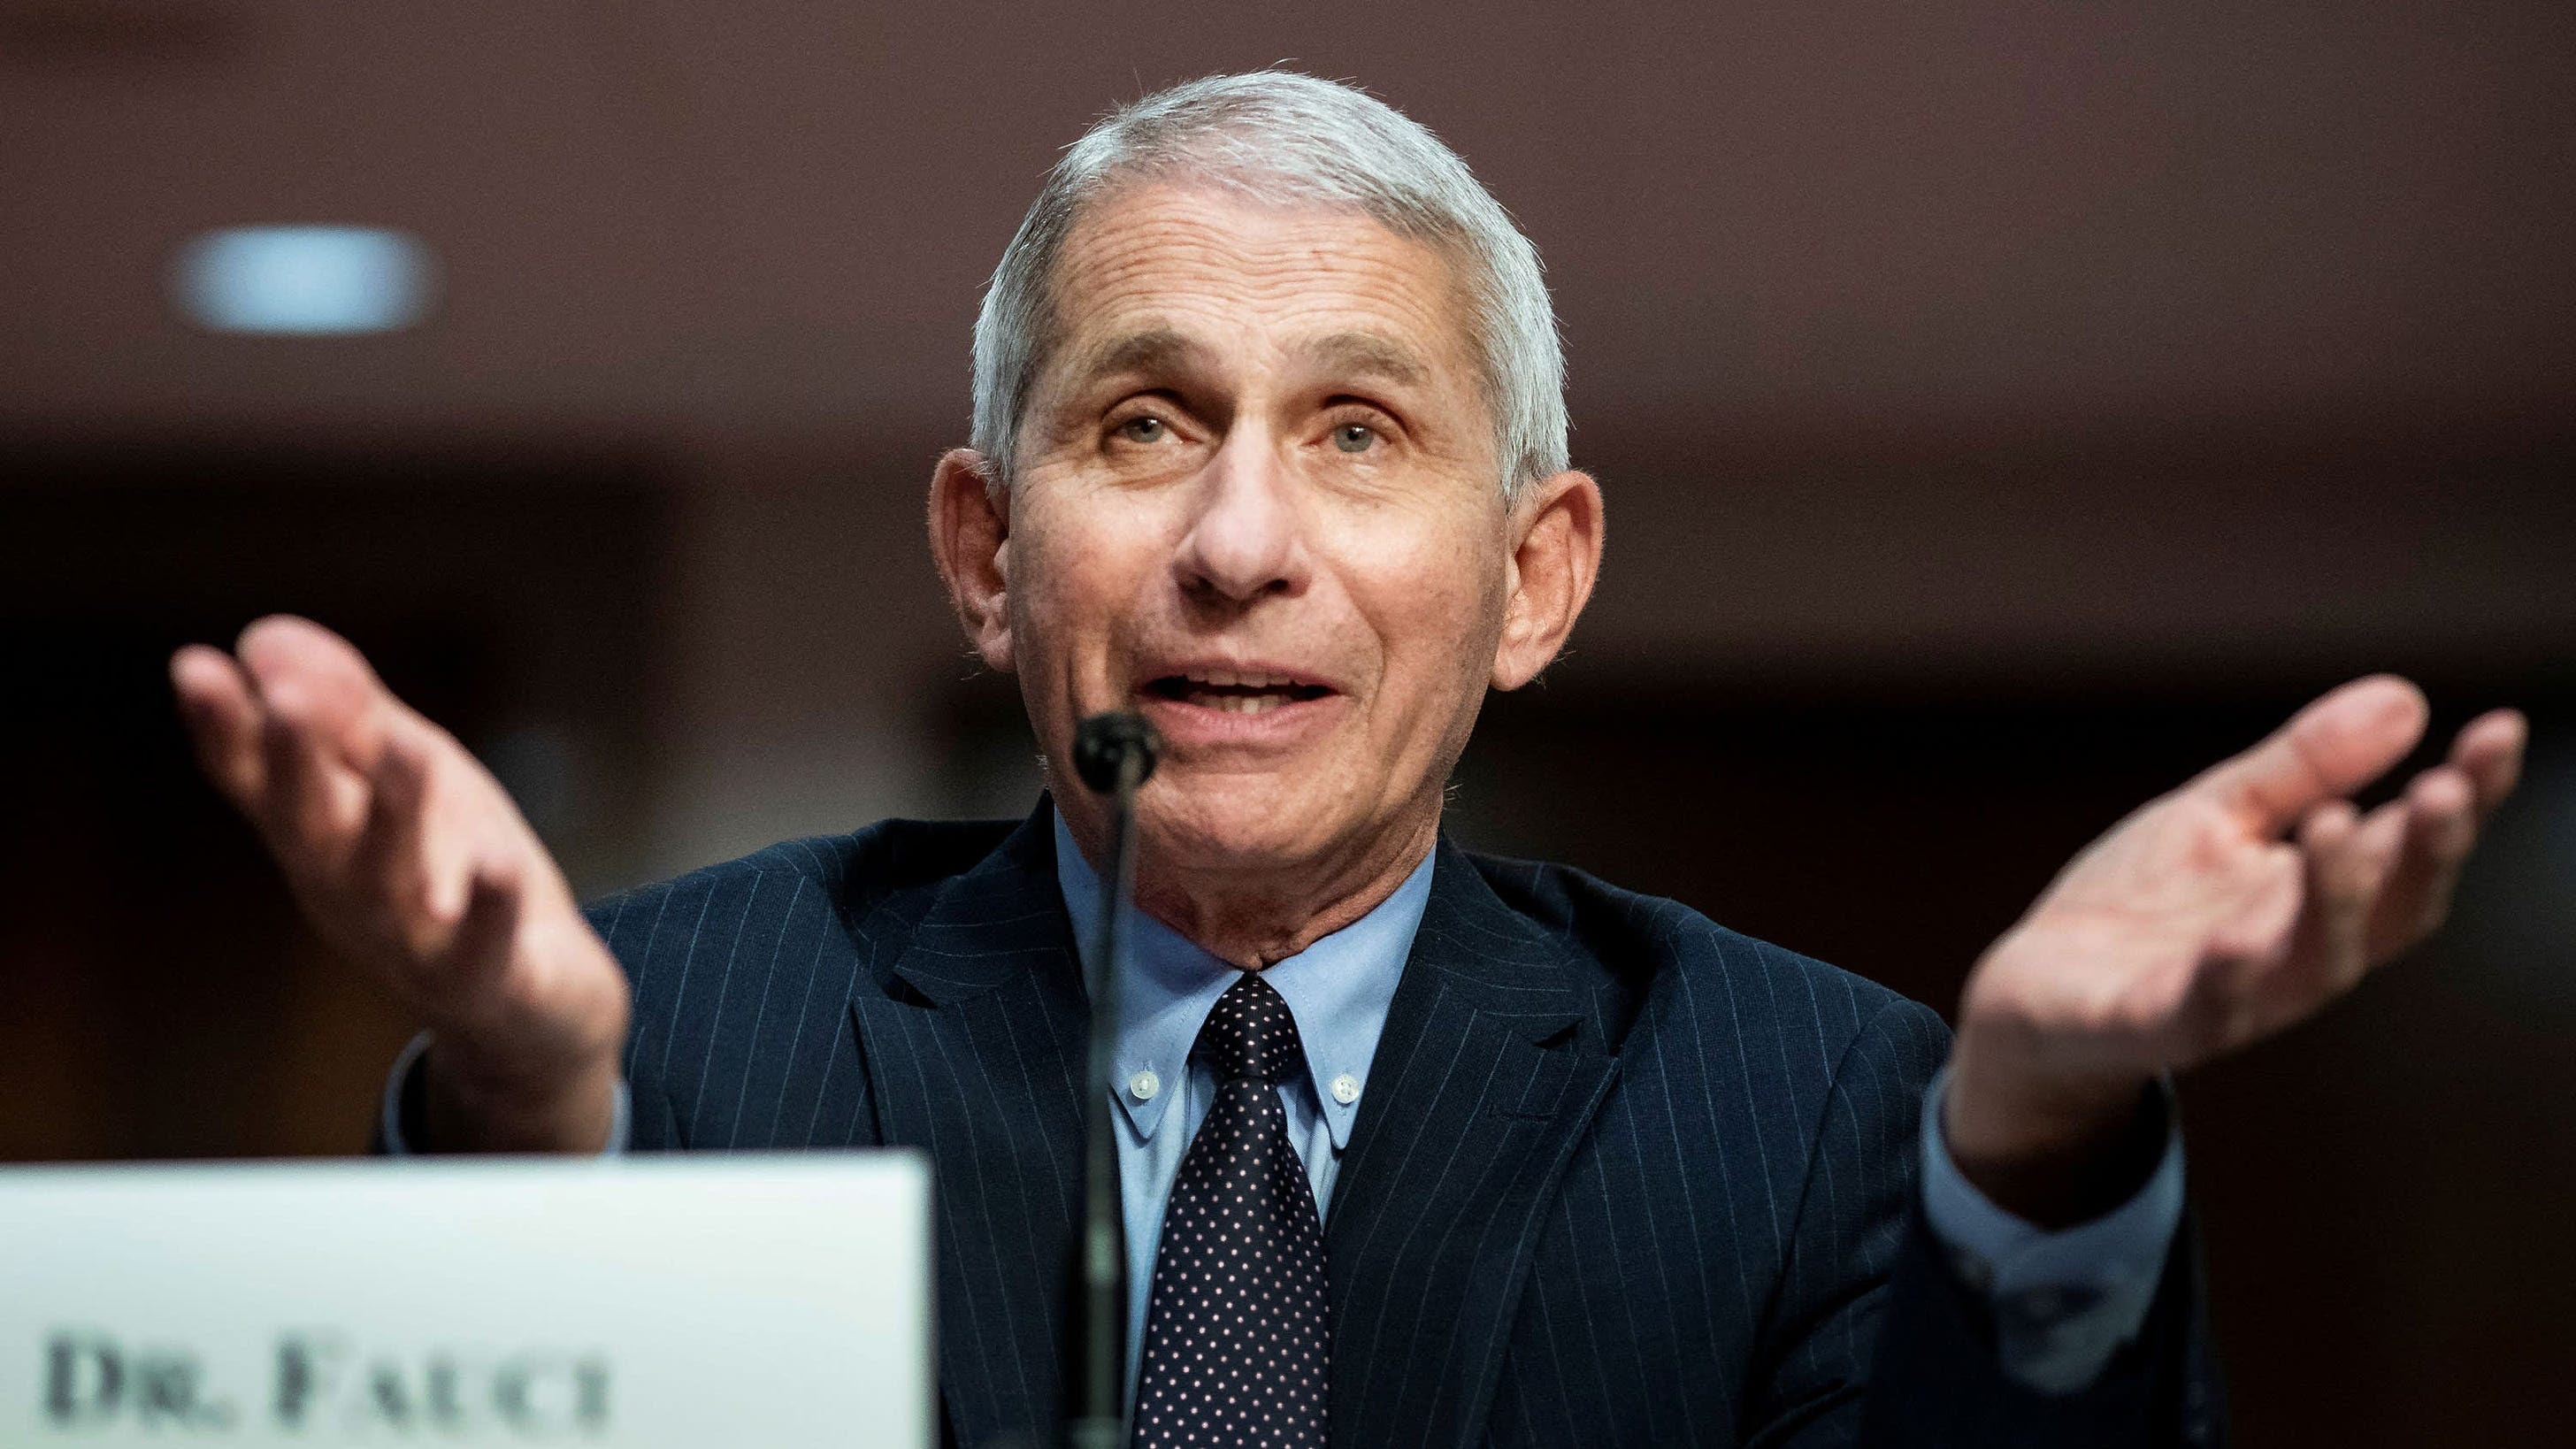 Watch live: Fauci, other health experts discuss Covid surge and vaccines